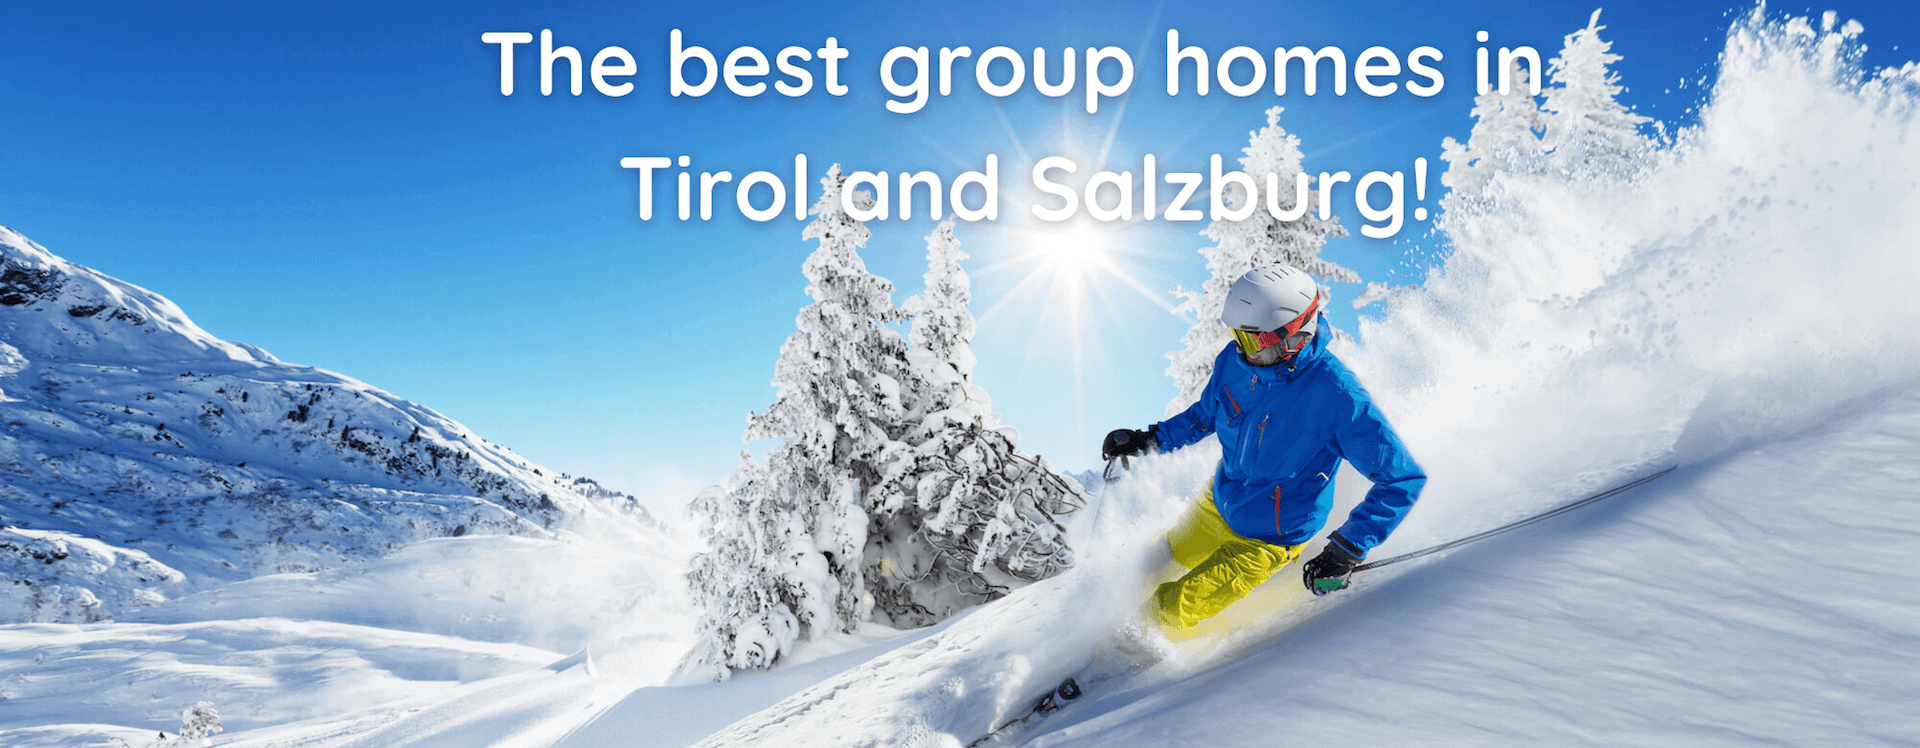 The best group homes in Tirol